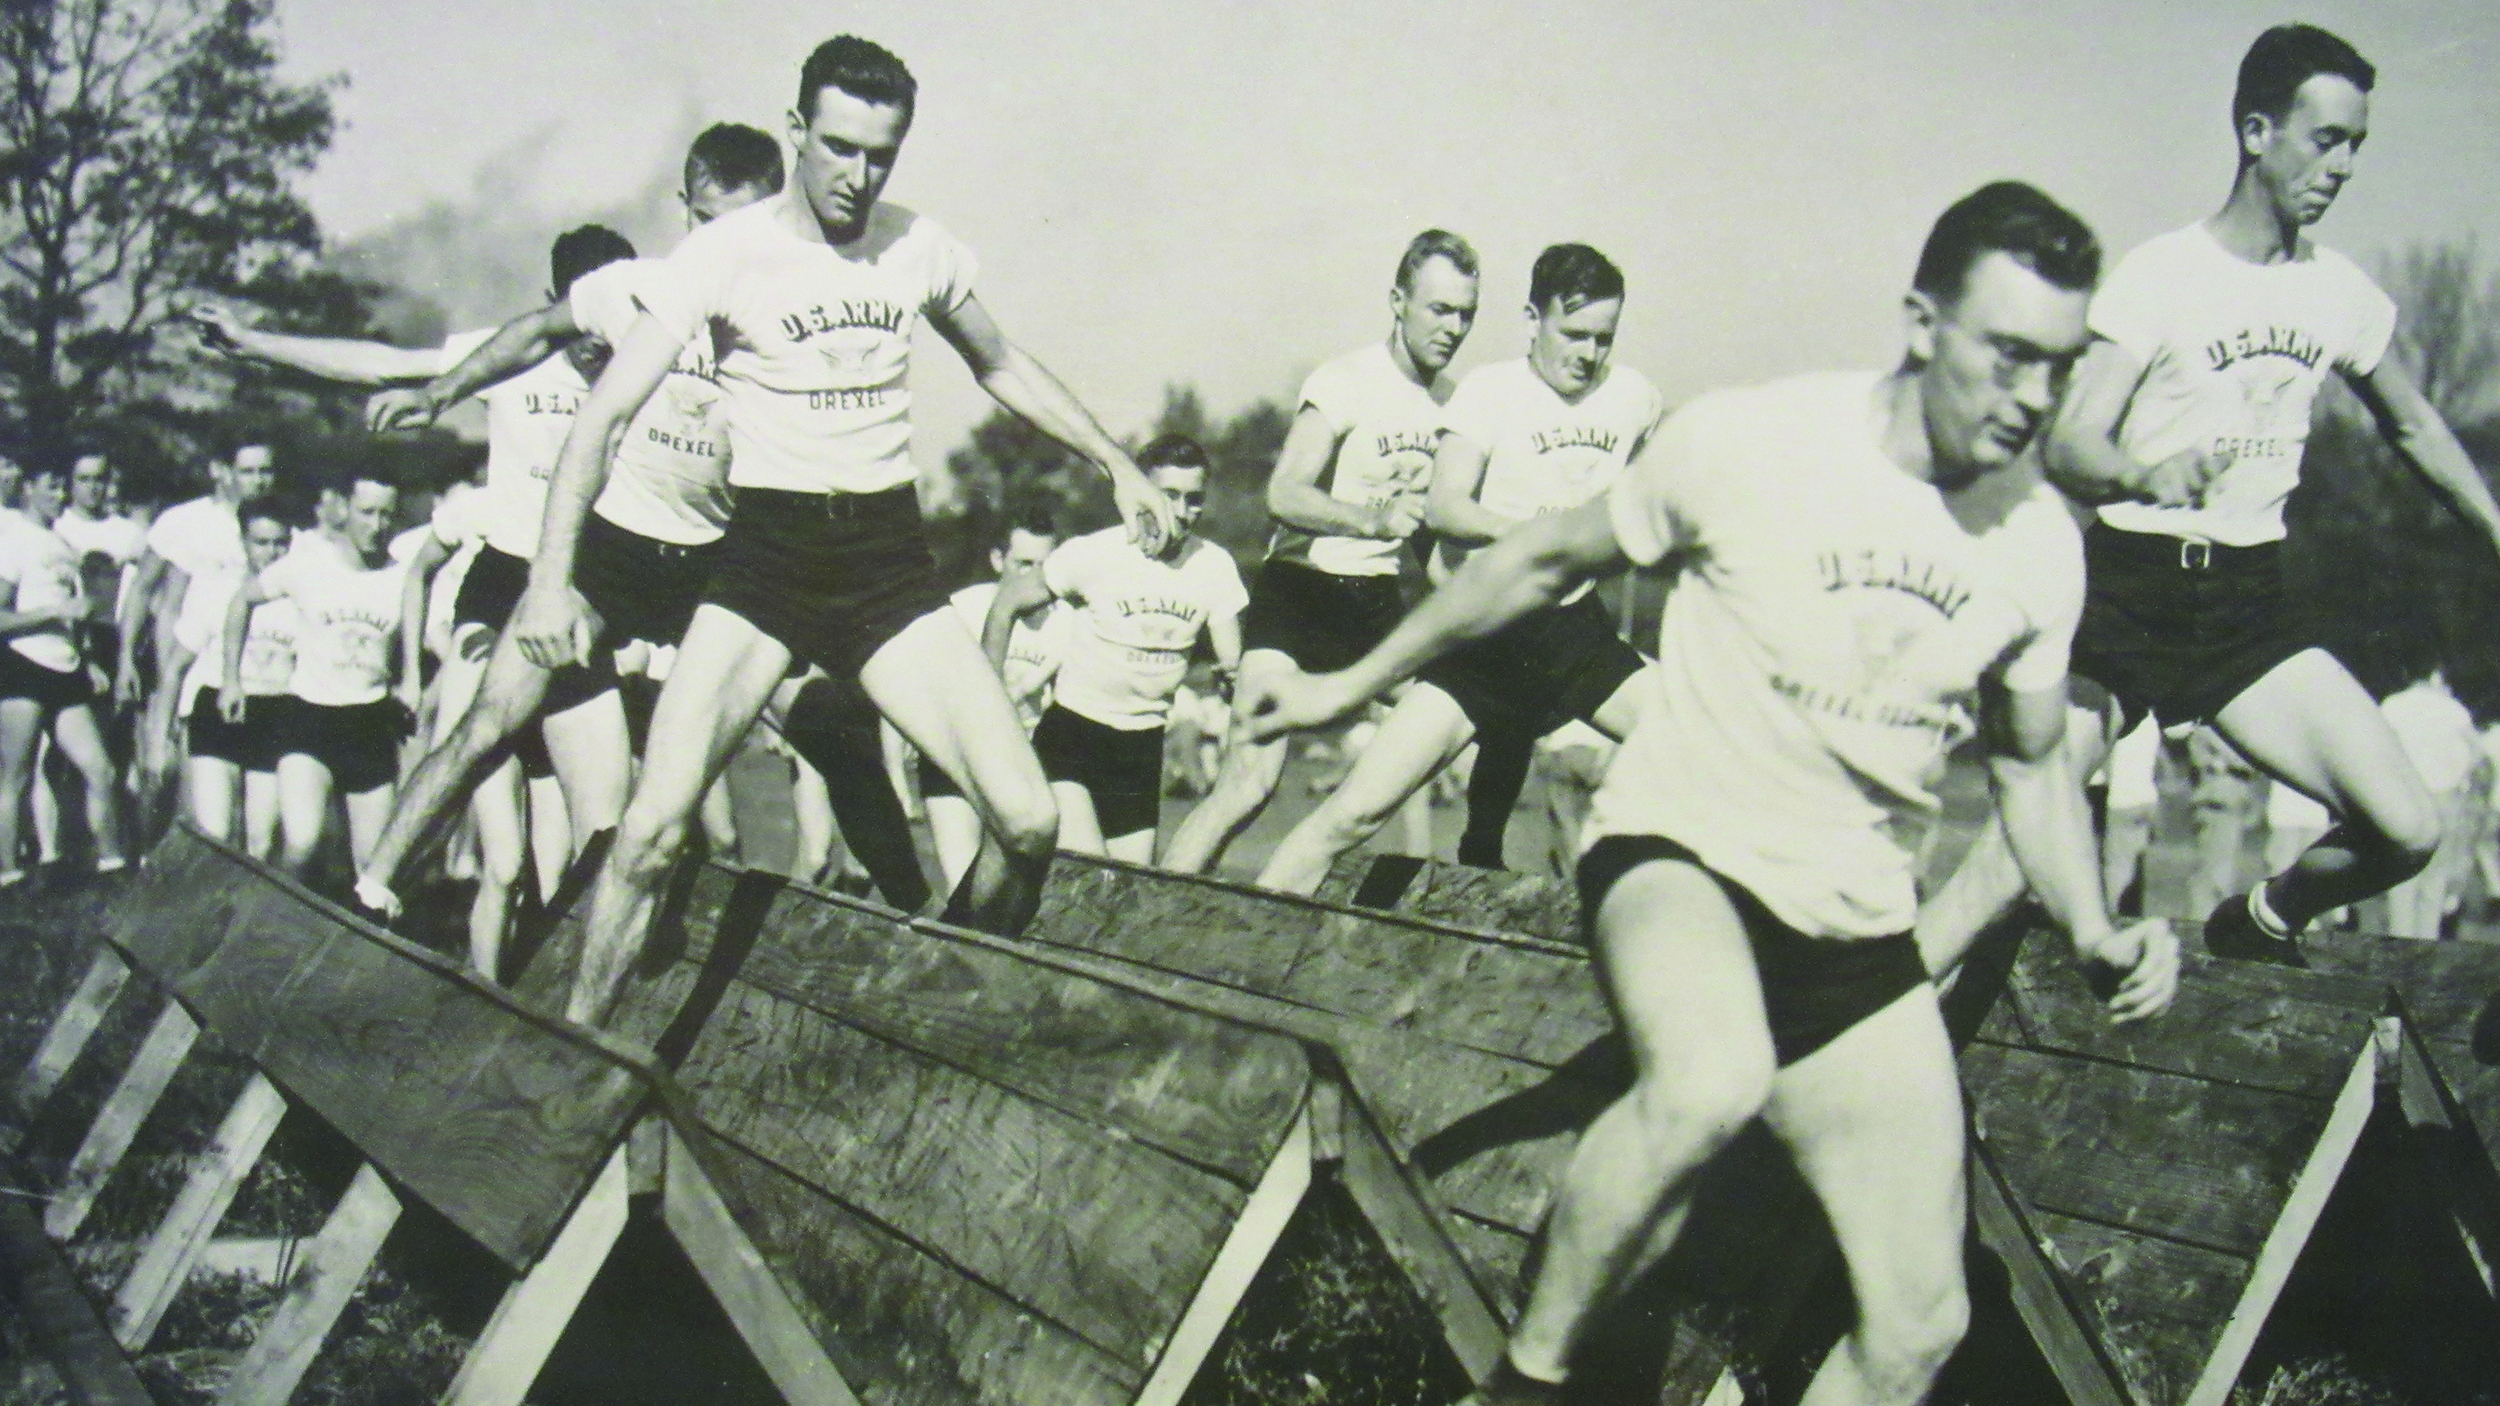 A black and white photo of a large group of U.S. Army cadets navigating an obstacle course, wearing shirts that say 'US Army, Drexel'.